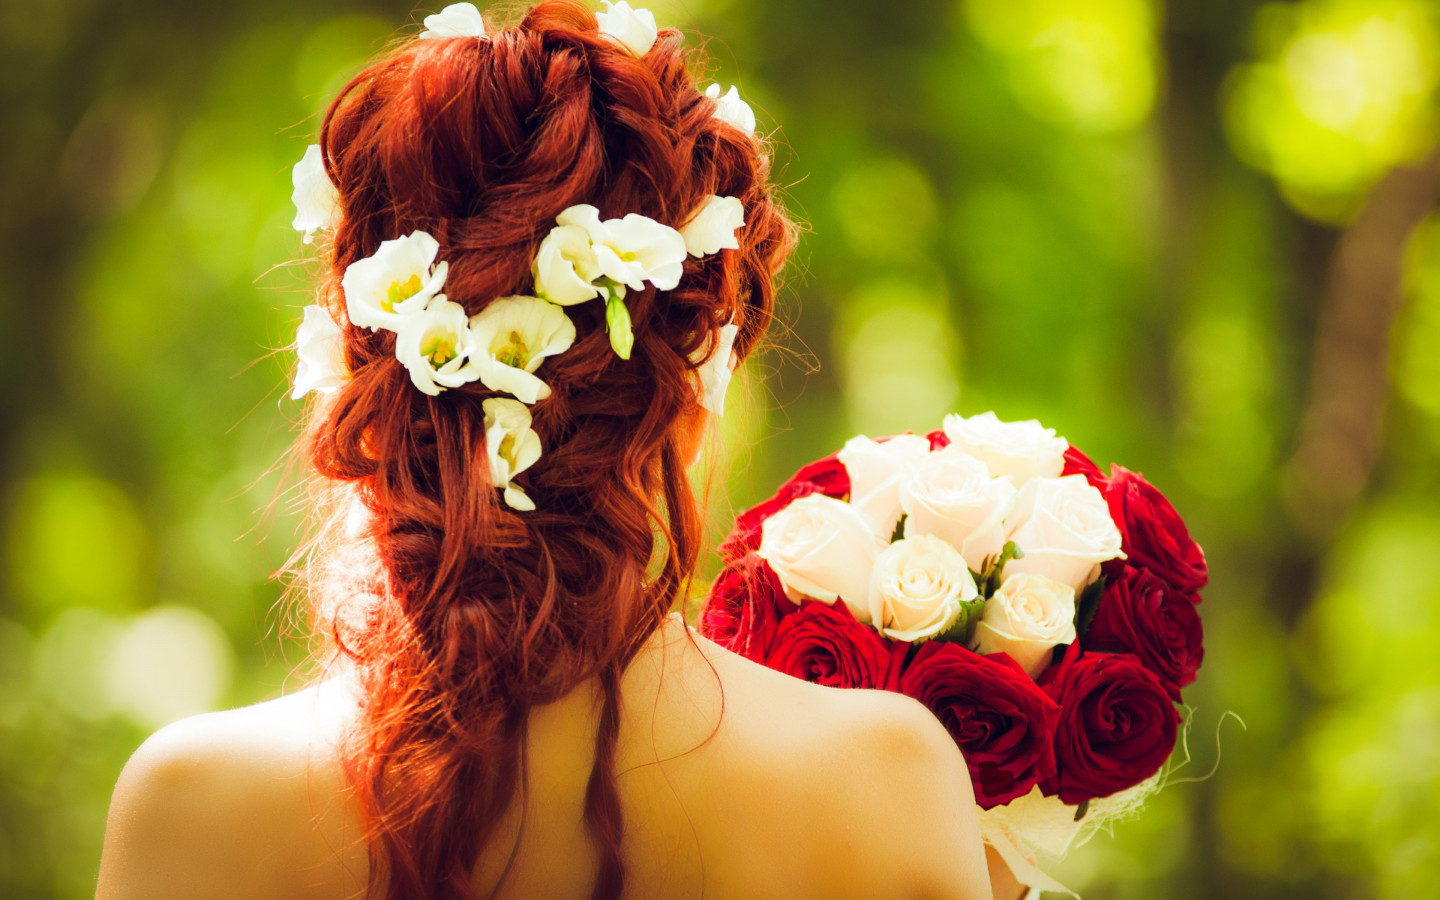 Bride and wedding flowers wallpaper 1440x900